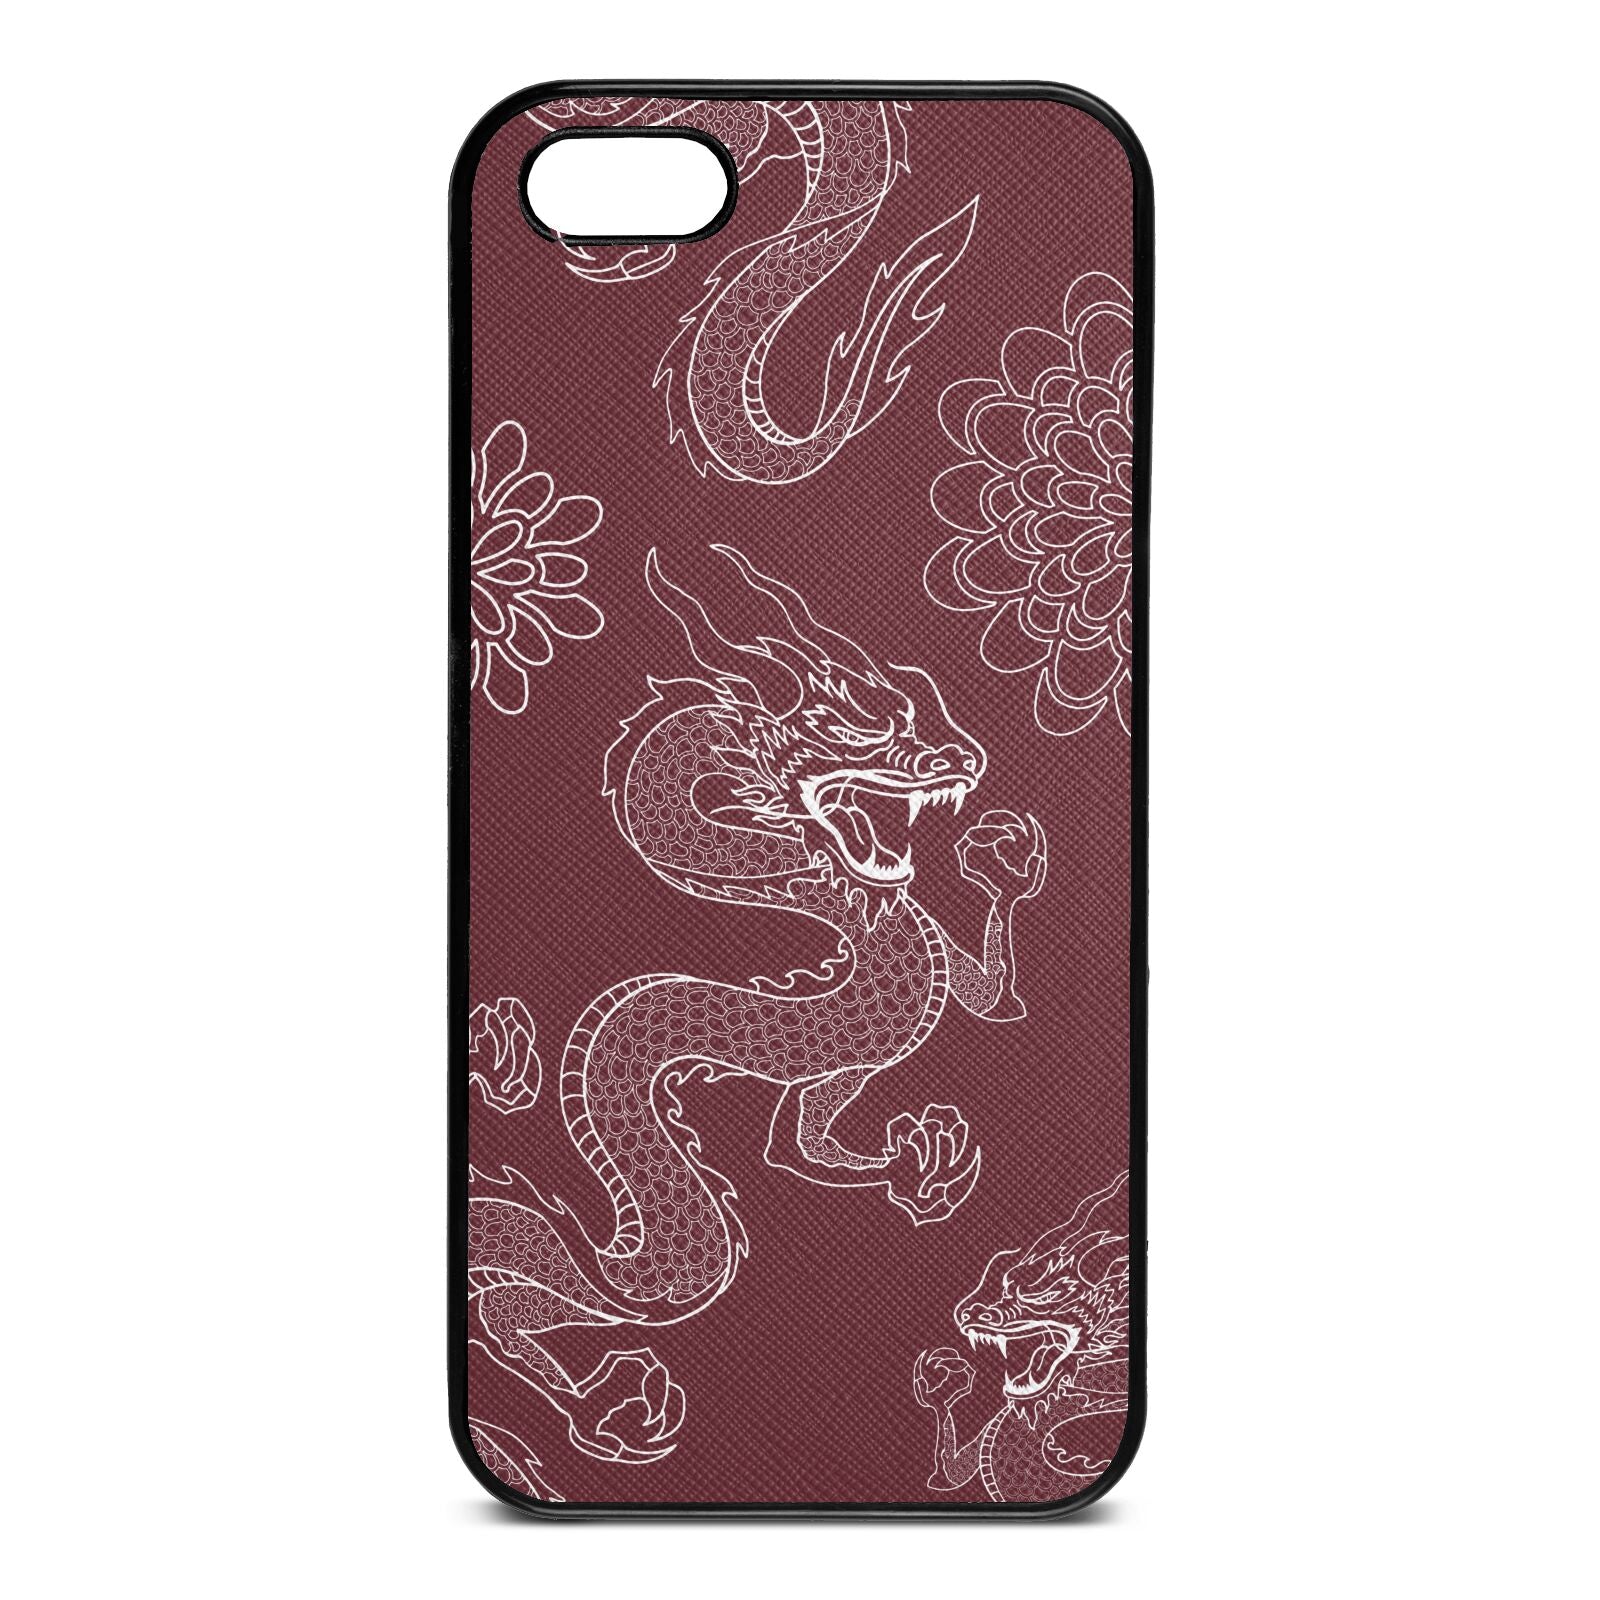 Dragons Rose Brown Saffiano Leather iPhone 5 Case